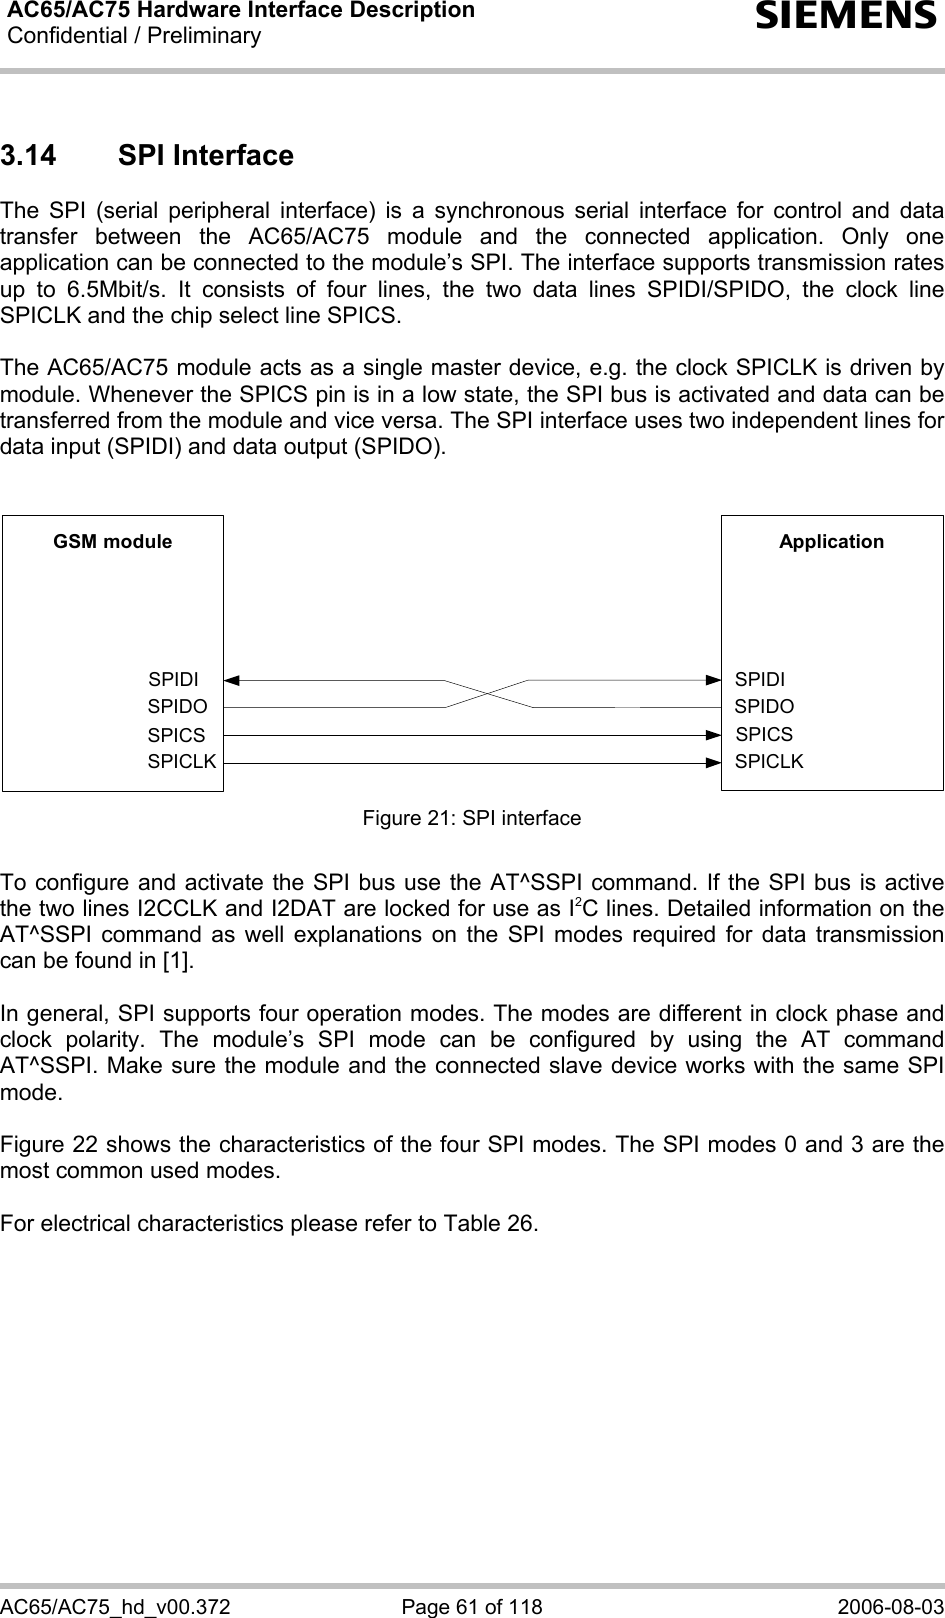 AC65/AC75 Hardware Interface Description Confidential / Preliminary   s AC65/AC75_hd_v00.372  Page 61 of 118  2006-08-03 3.14 SPI Interface The SPI (serial peripheral interface) is a synchronous serial interface for control and data transfer between the AC65/AC75 module and the connected application. Only one application can be connected to the module’s SPI. The interface supports transmission rates up to 6.5Mbit/s. It consists of four lines, the two data lines SPIDI/SPIDO, the clock line SPICLK and the chip select line SPICS.   The AC65/AC75 module acts as a single master device, e.g. the clock SPICLK is driven by module. Whenever the SPICS pin is in a low state, the SPI bus is activated and data can be transferred from the module and vice versa. The SPI interface uses two independent lines for data input (SPIDI) and data output (SPIDO).   GSM module ApplicationSPICLK SPICLKSPICS SPICSSPIDOSPIDI SPIDISPIDO Figure 21: SPI interface  To configure and activate the SPI bus use the AT^SSPI command. If the SPI bus is active the two lines I2CCLK and I2DAT are locked for use as I2C lines. Detailed information on the AT^SSPI command as well explanations on the SPI modes required for data transmission can be found in [1].  In general, SPI supports four operation modes. The modes are different in clock phase and clock polarity. The module’s SPI mode can be configured by using the AT command AT^SSPI. Make sure the module and the connected slave device works with the same SPI mode.  Figure 22 shows the characteristics of the four SPI modes. The SPI modes 0 and 3 are the most common used modes.   For electrical characteristics please refer to Table 26.  